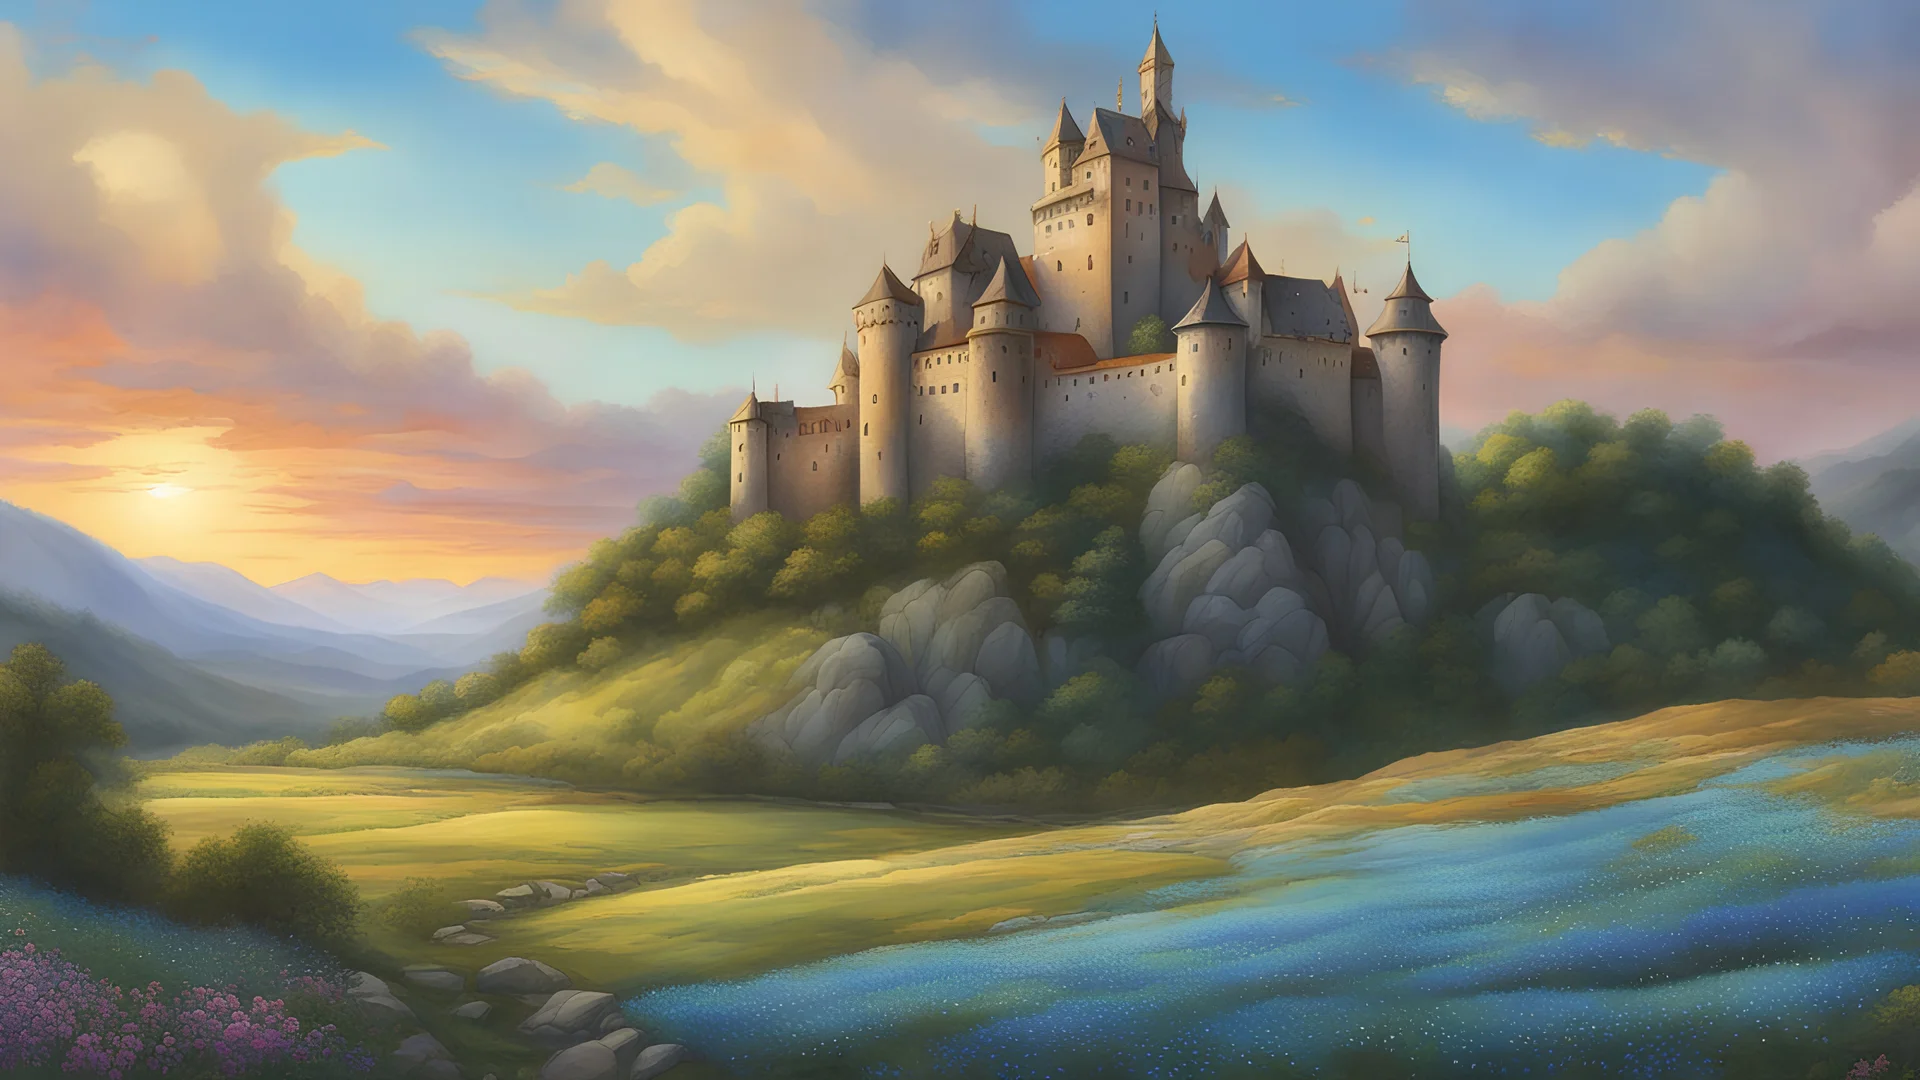 A watercolour painting of a medieval castle on a mountain